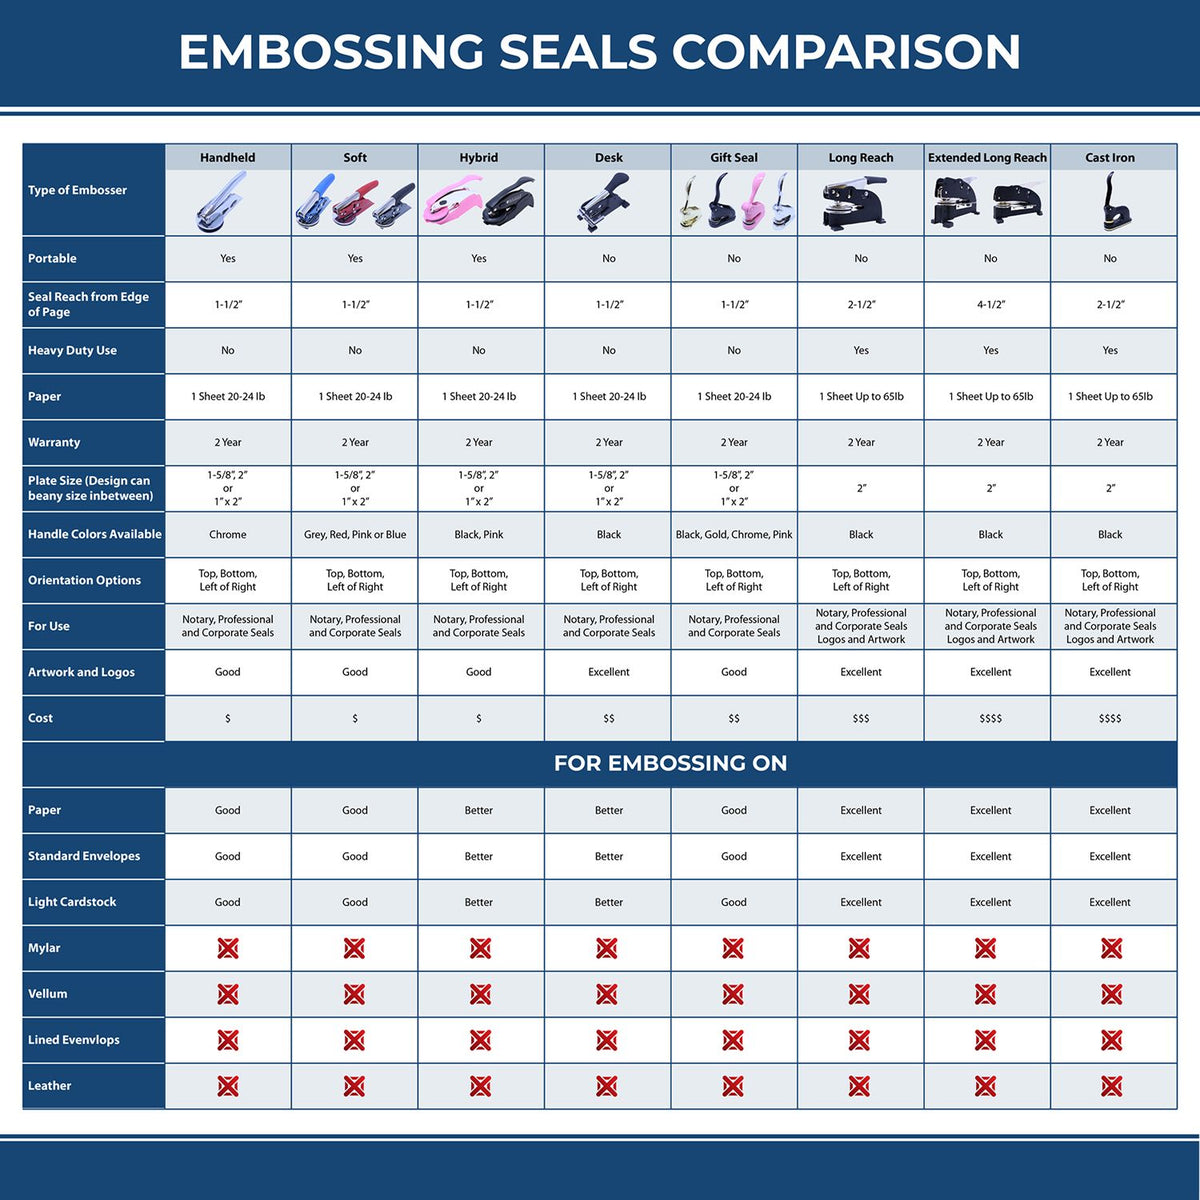 A comparison chart for the different types of mount models available for the State of North Carolina Soft Land Surveyor Embossing Seal.